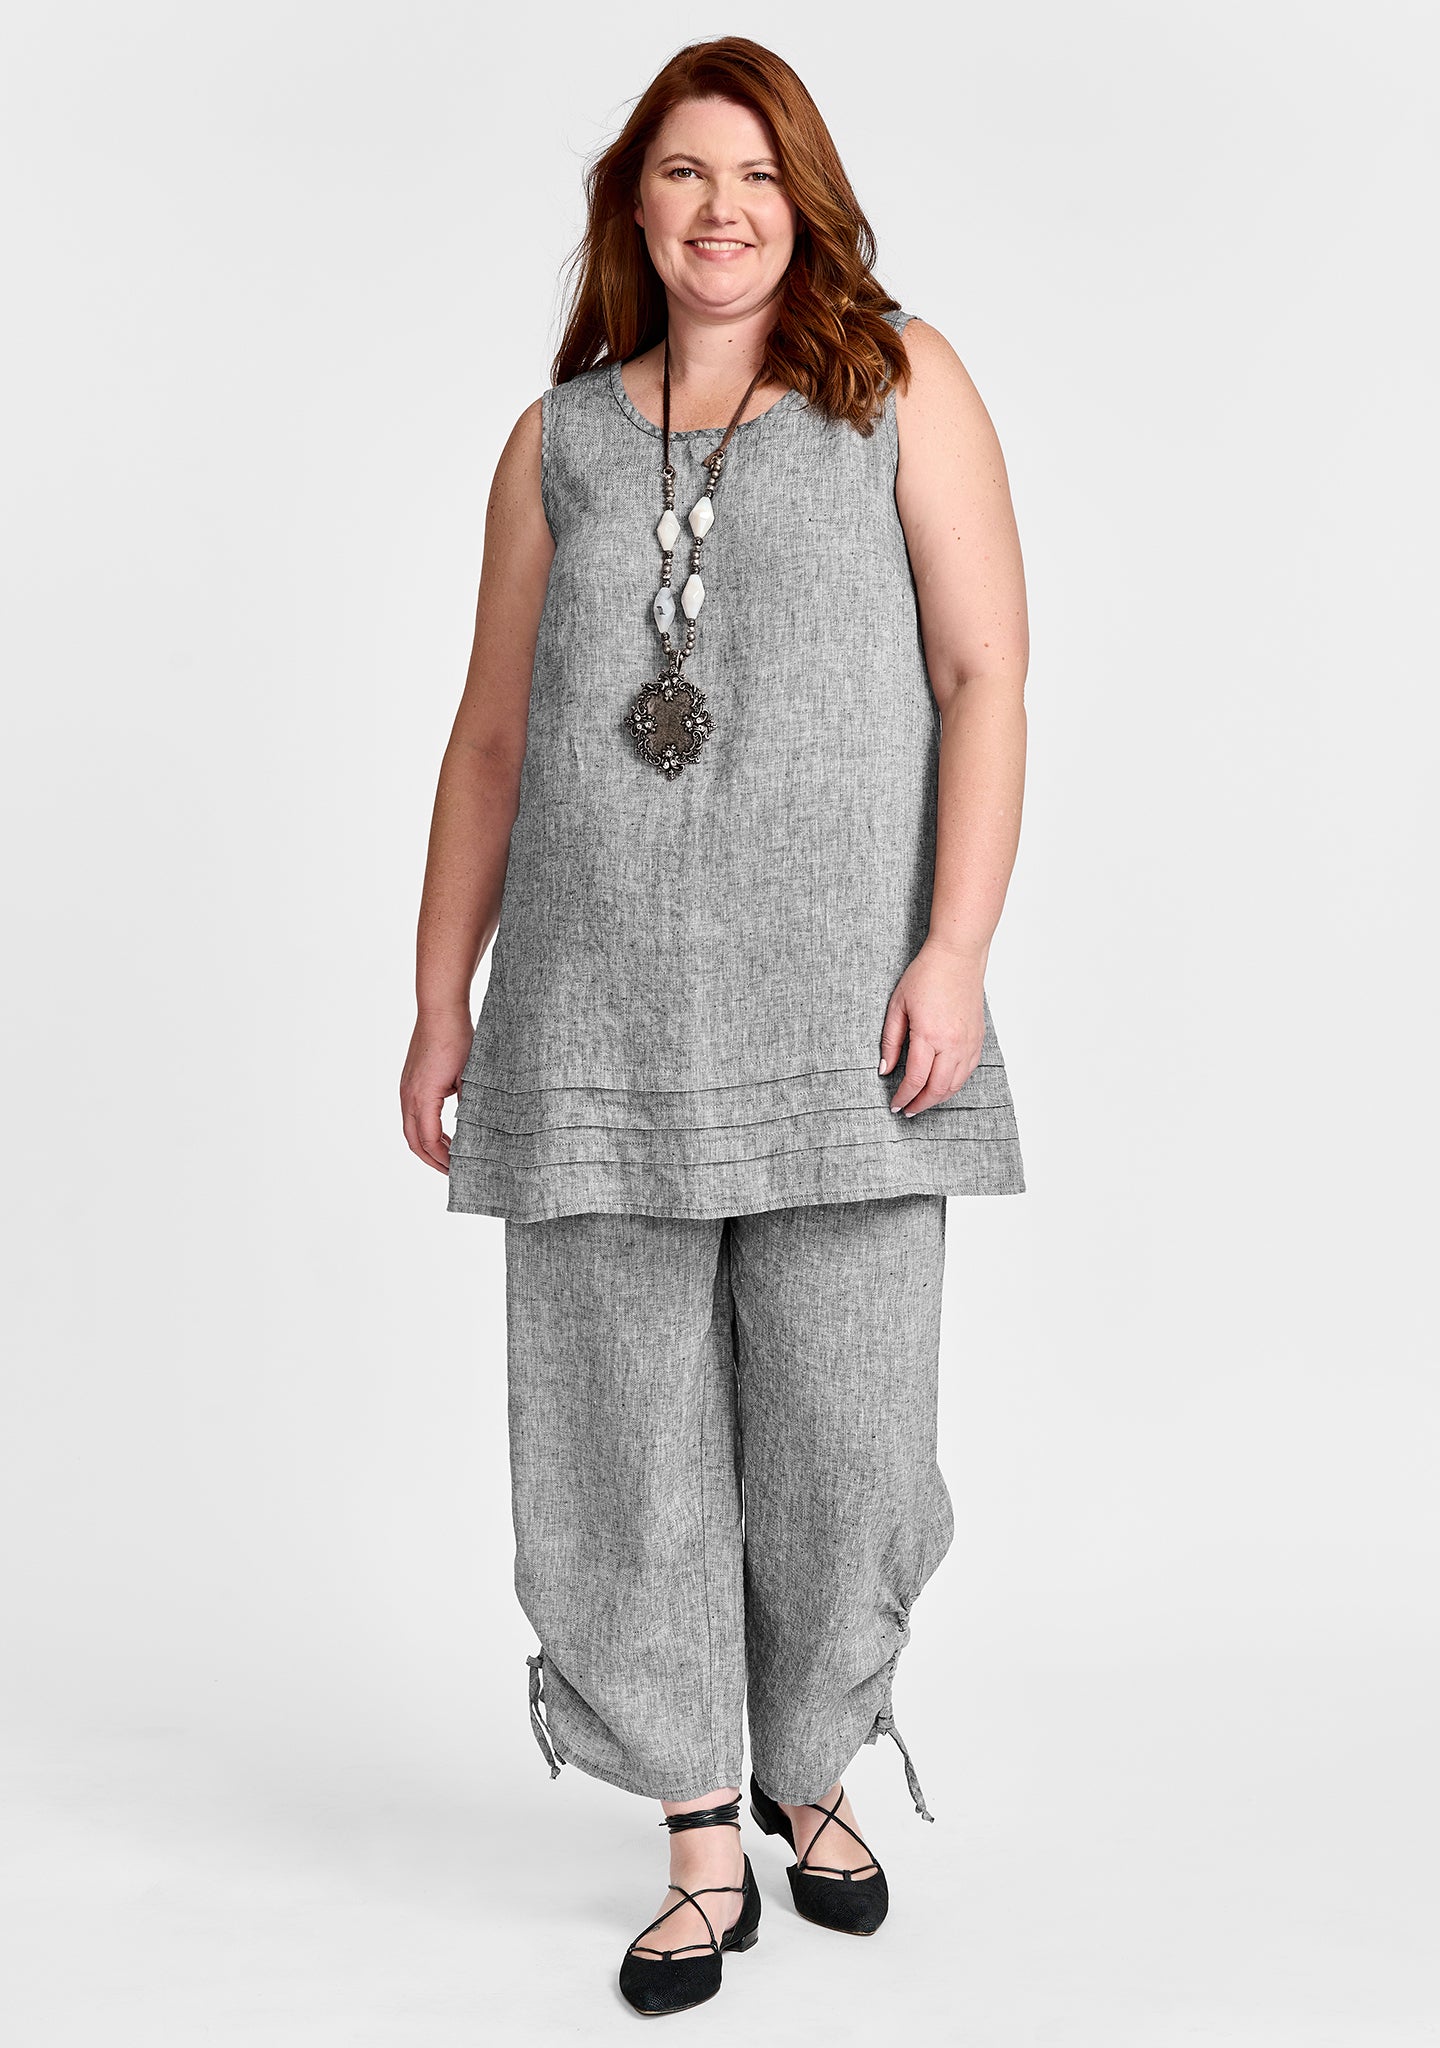 FLAX linen tunic in grey with linen pants in grey